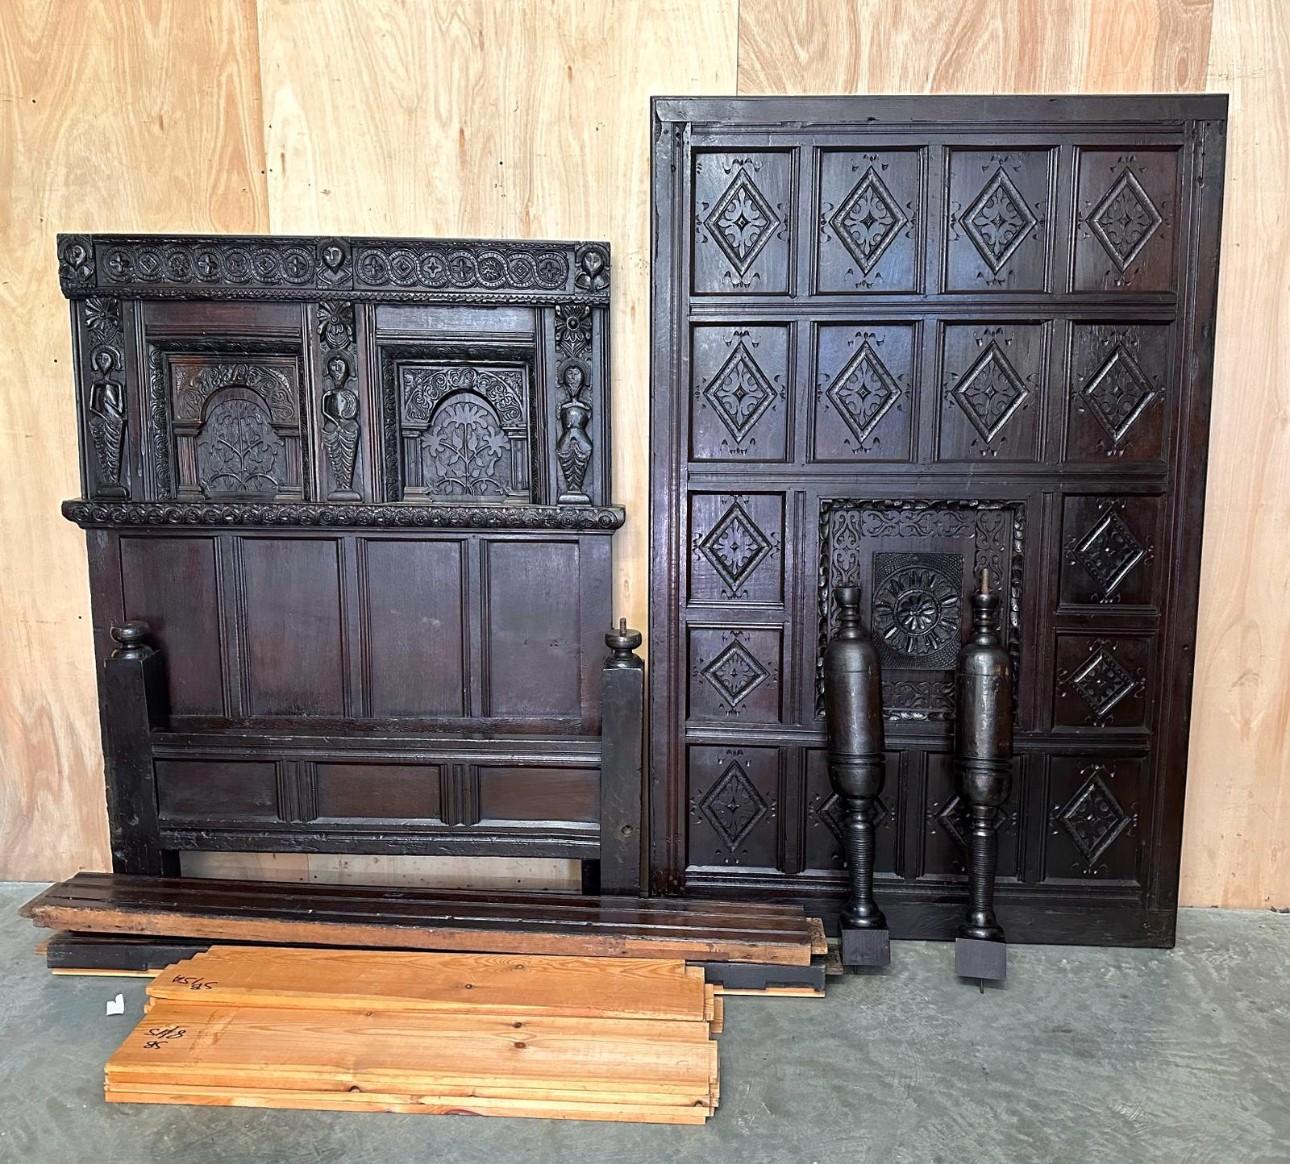 Royal House Antiques

Royal House Antiques is delighted to offer for sale this very rare, original circa 1650 William III hand carved Jacobean Tester four poster bed frame with exquisite carvings to the back panel and roof top

Please note the